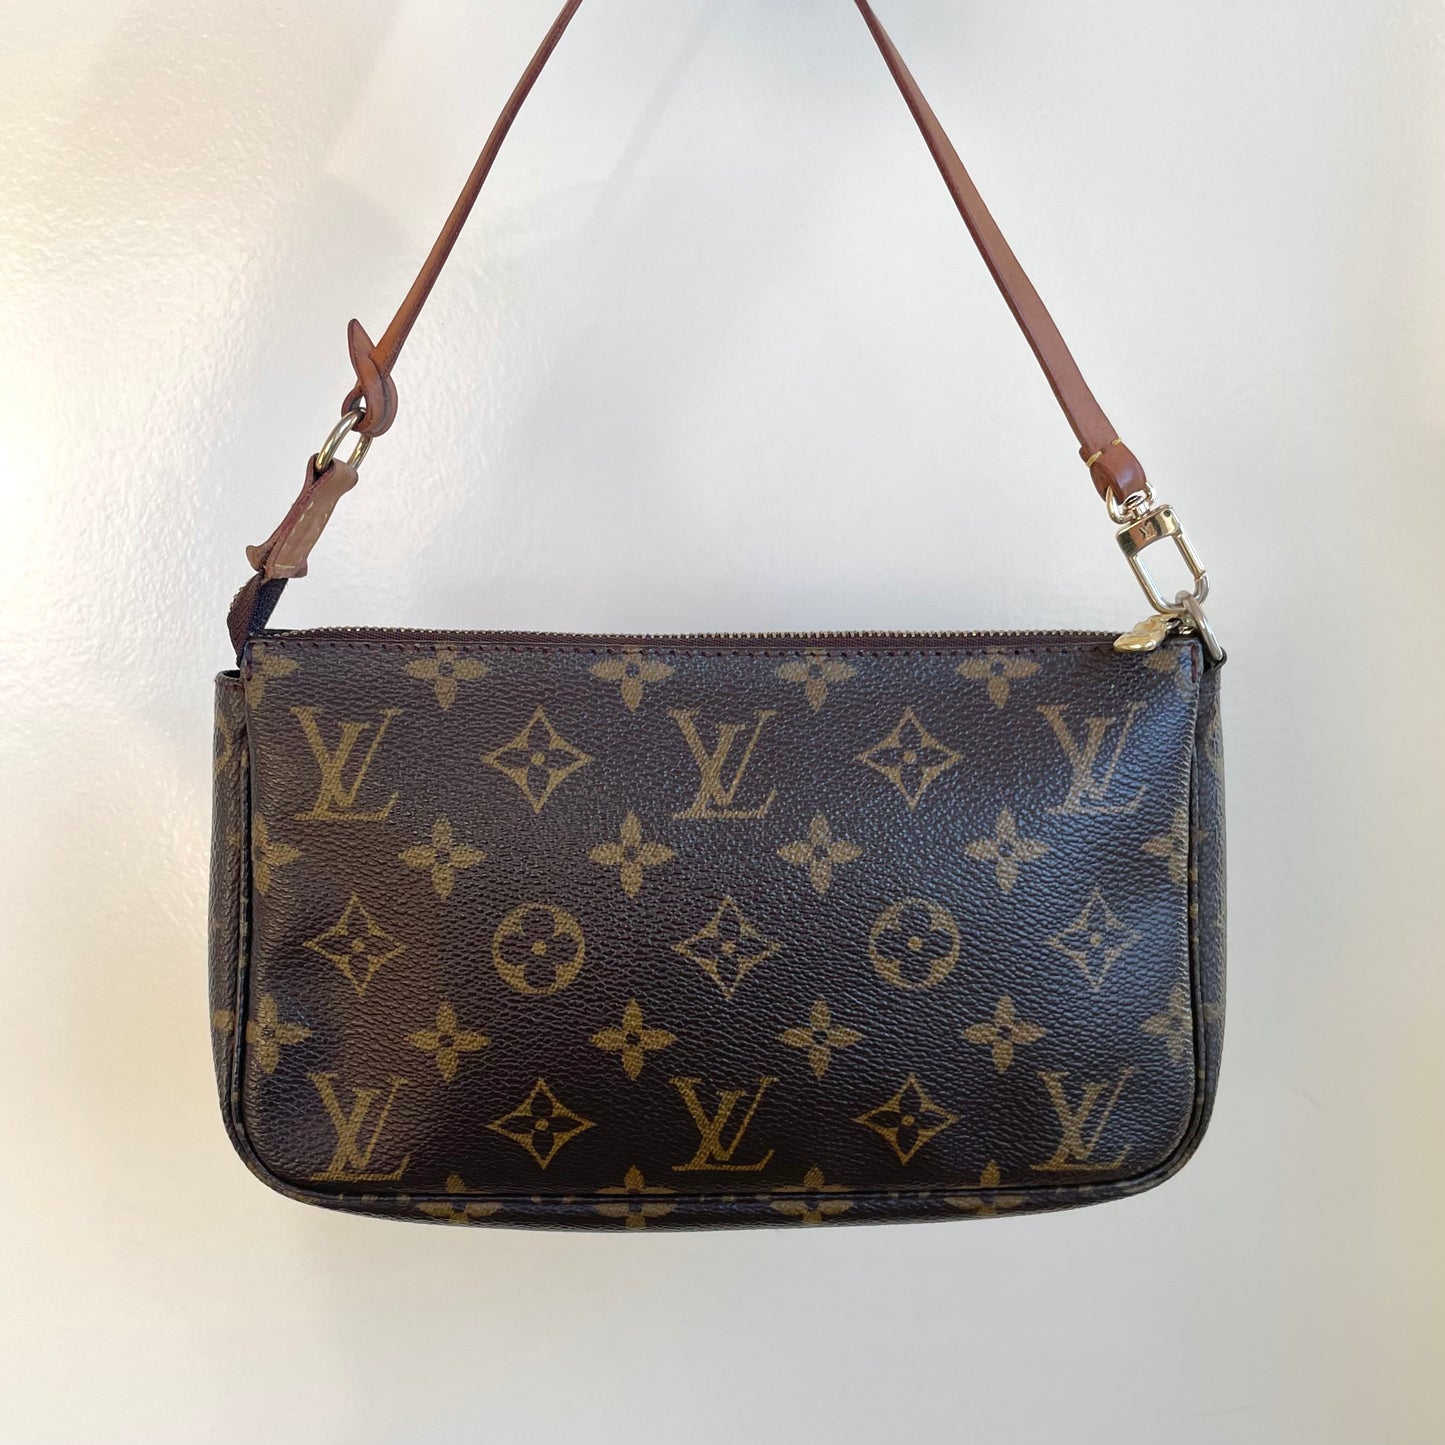 ✨Gently used classic monogram pochette. In great condition, minor